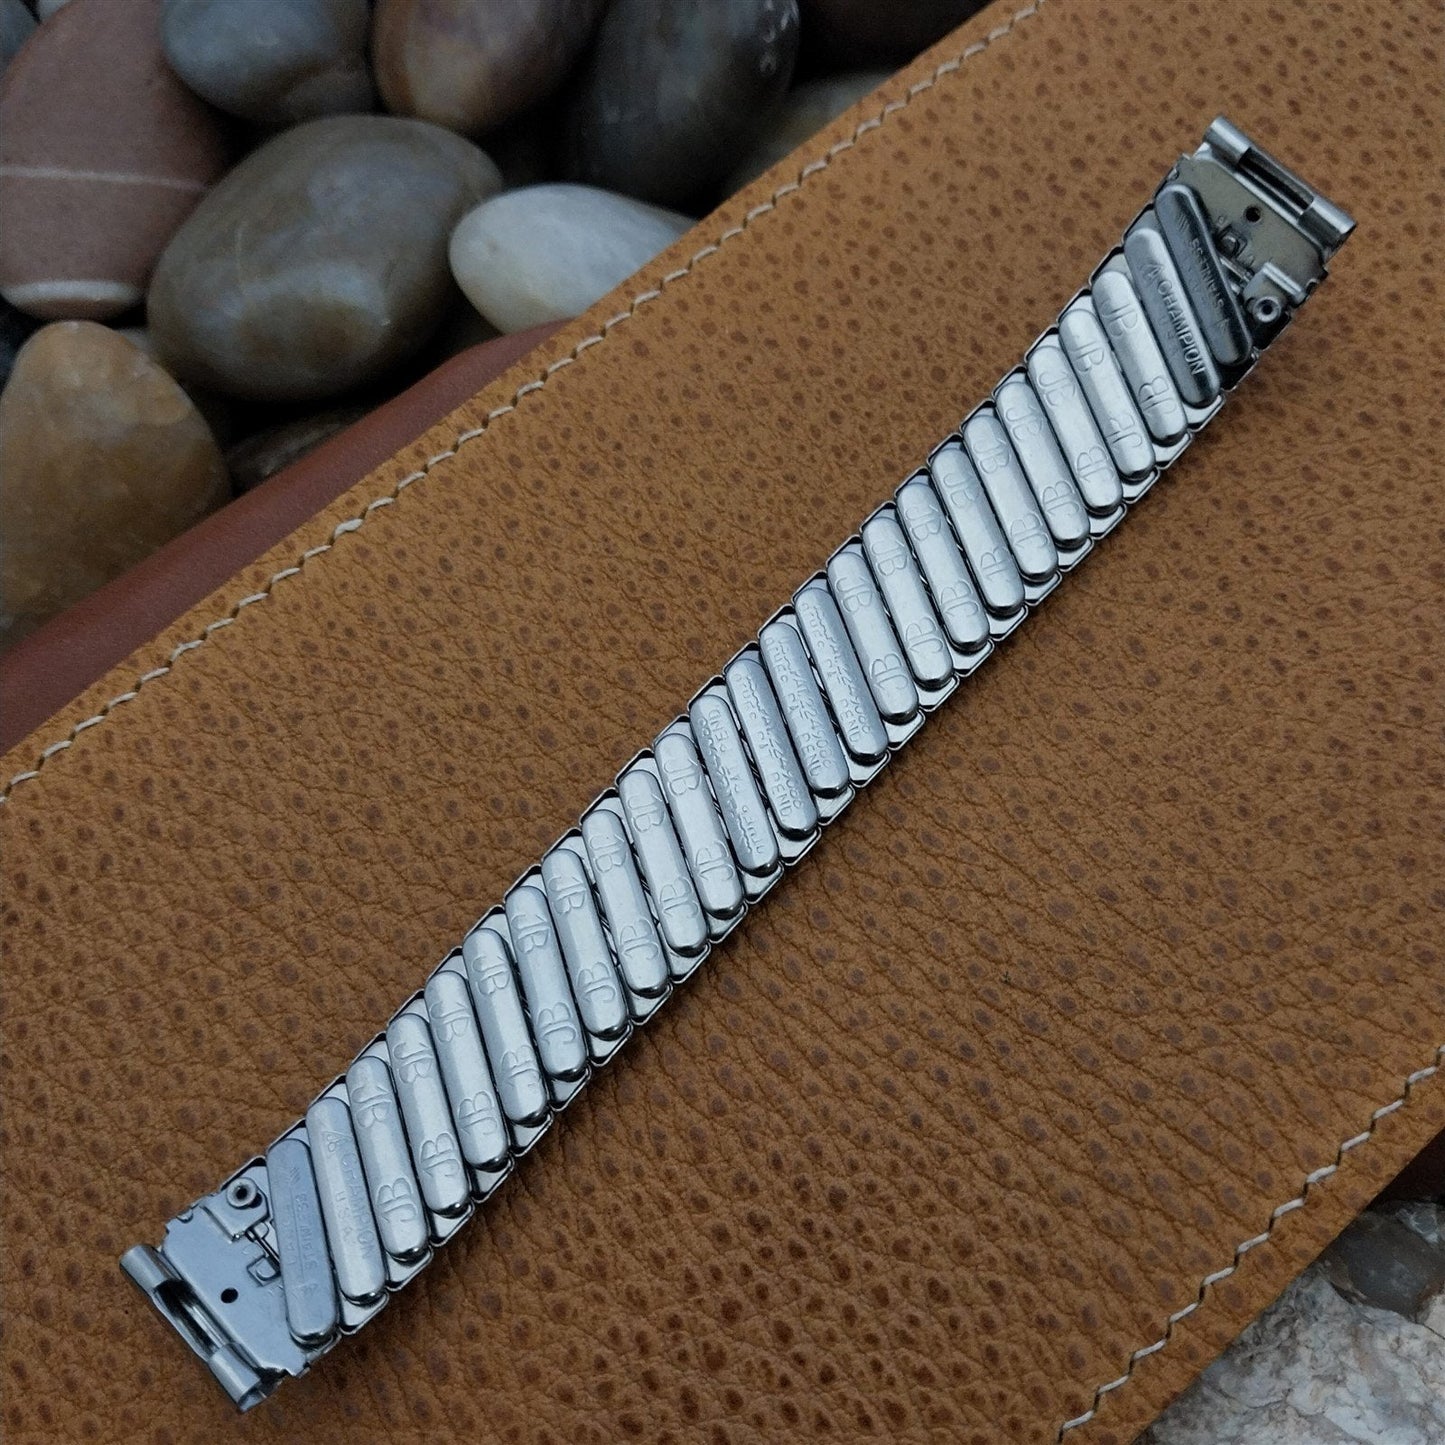 1950s 5/8" 16mm JB Champion USA Stainless Steel Old-Stock Vintage Watch Band